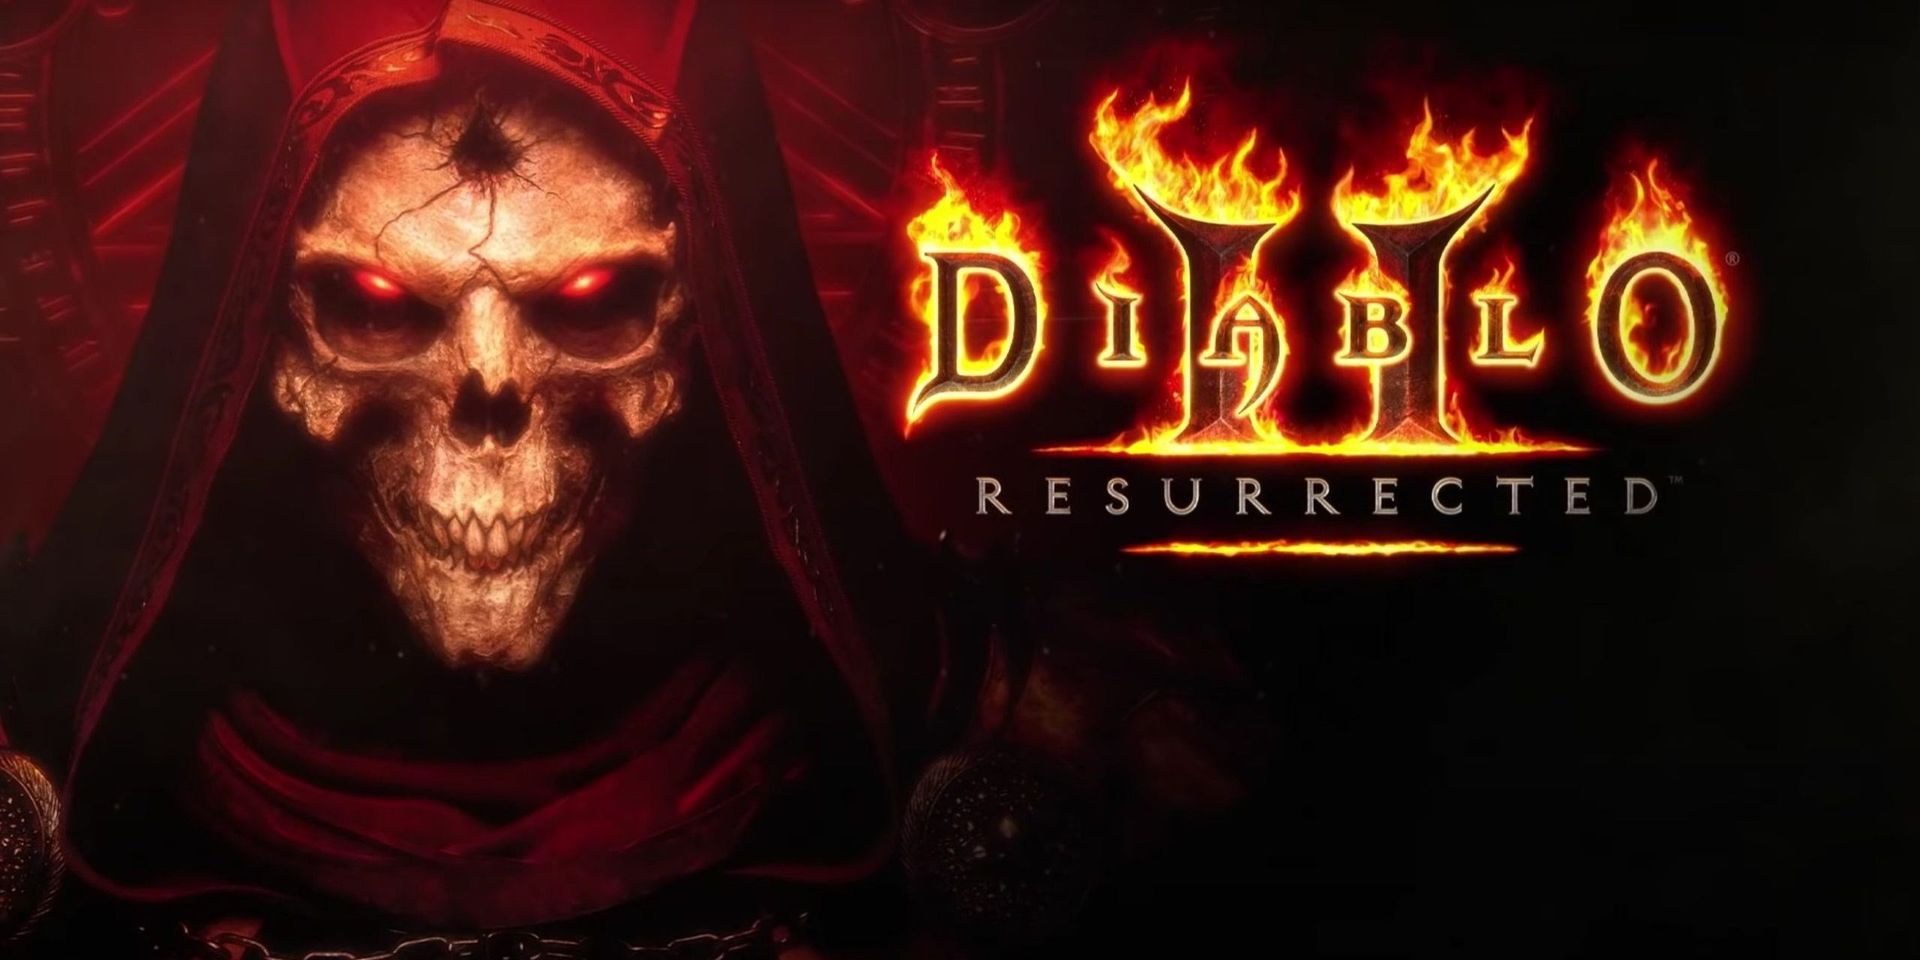 Do you want to learn how to craft a Lore Helm Diablo 2 Resurrected, we are here to help. The five helm runewords in Diablo 2 are Resurrected, Lore, Nadir, Radiance, Dream, and Delirium.